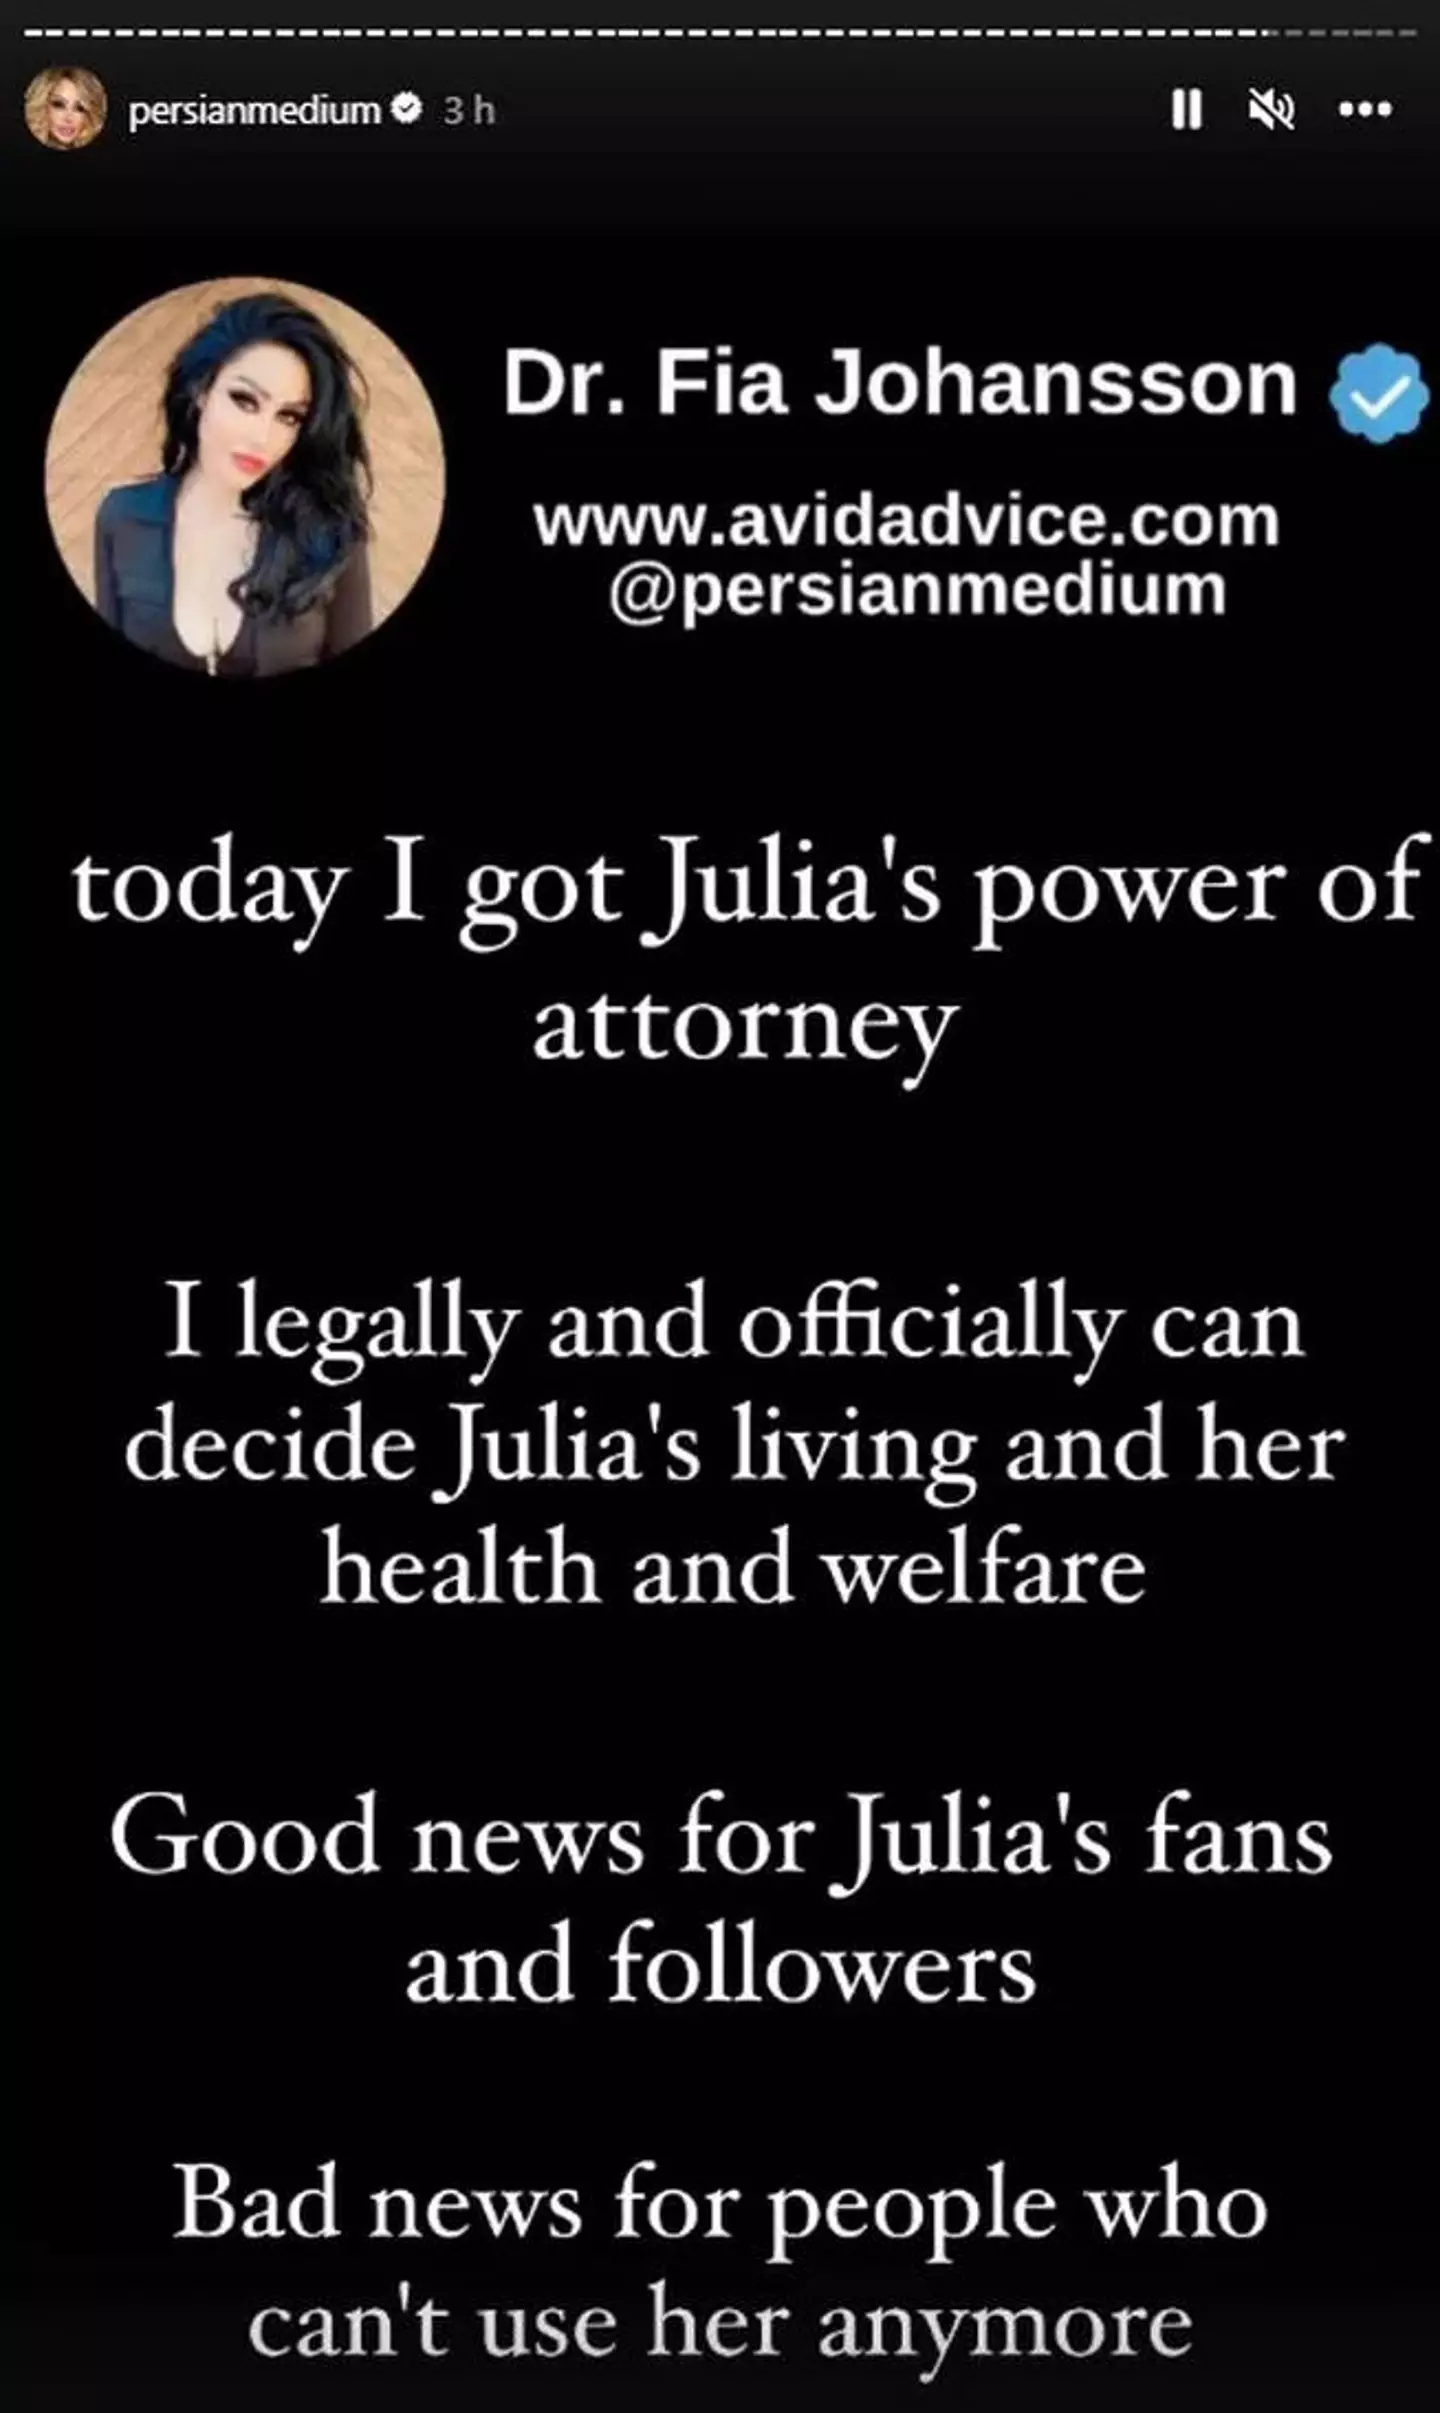 Dr Fia Johansson says she has gained power of attorney over Julia.